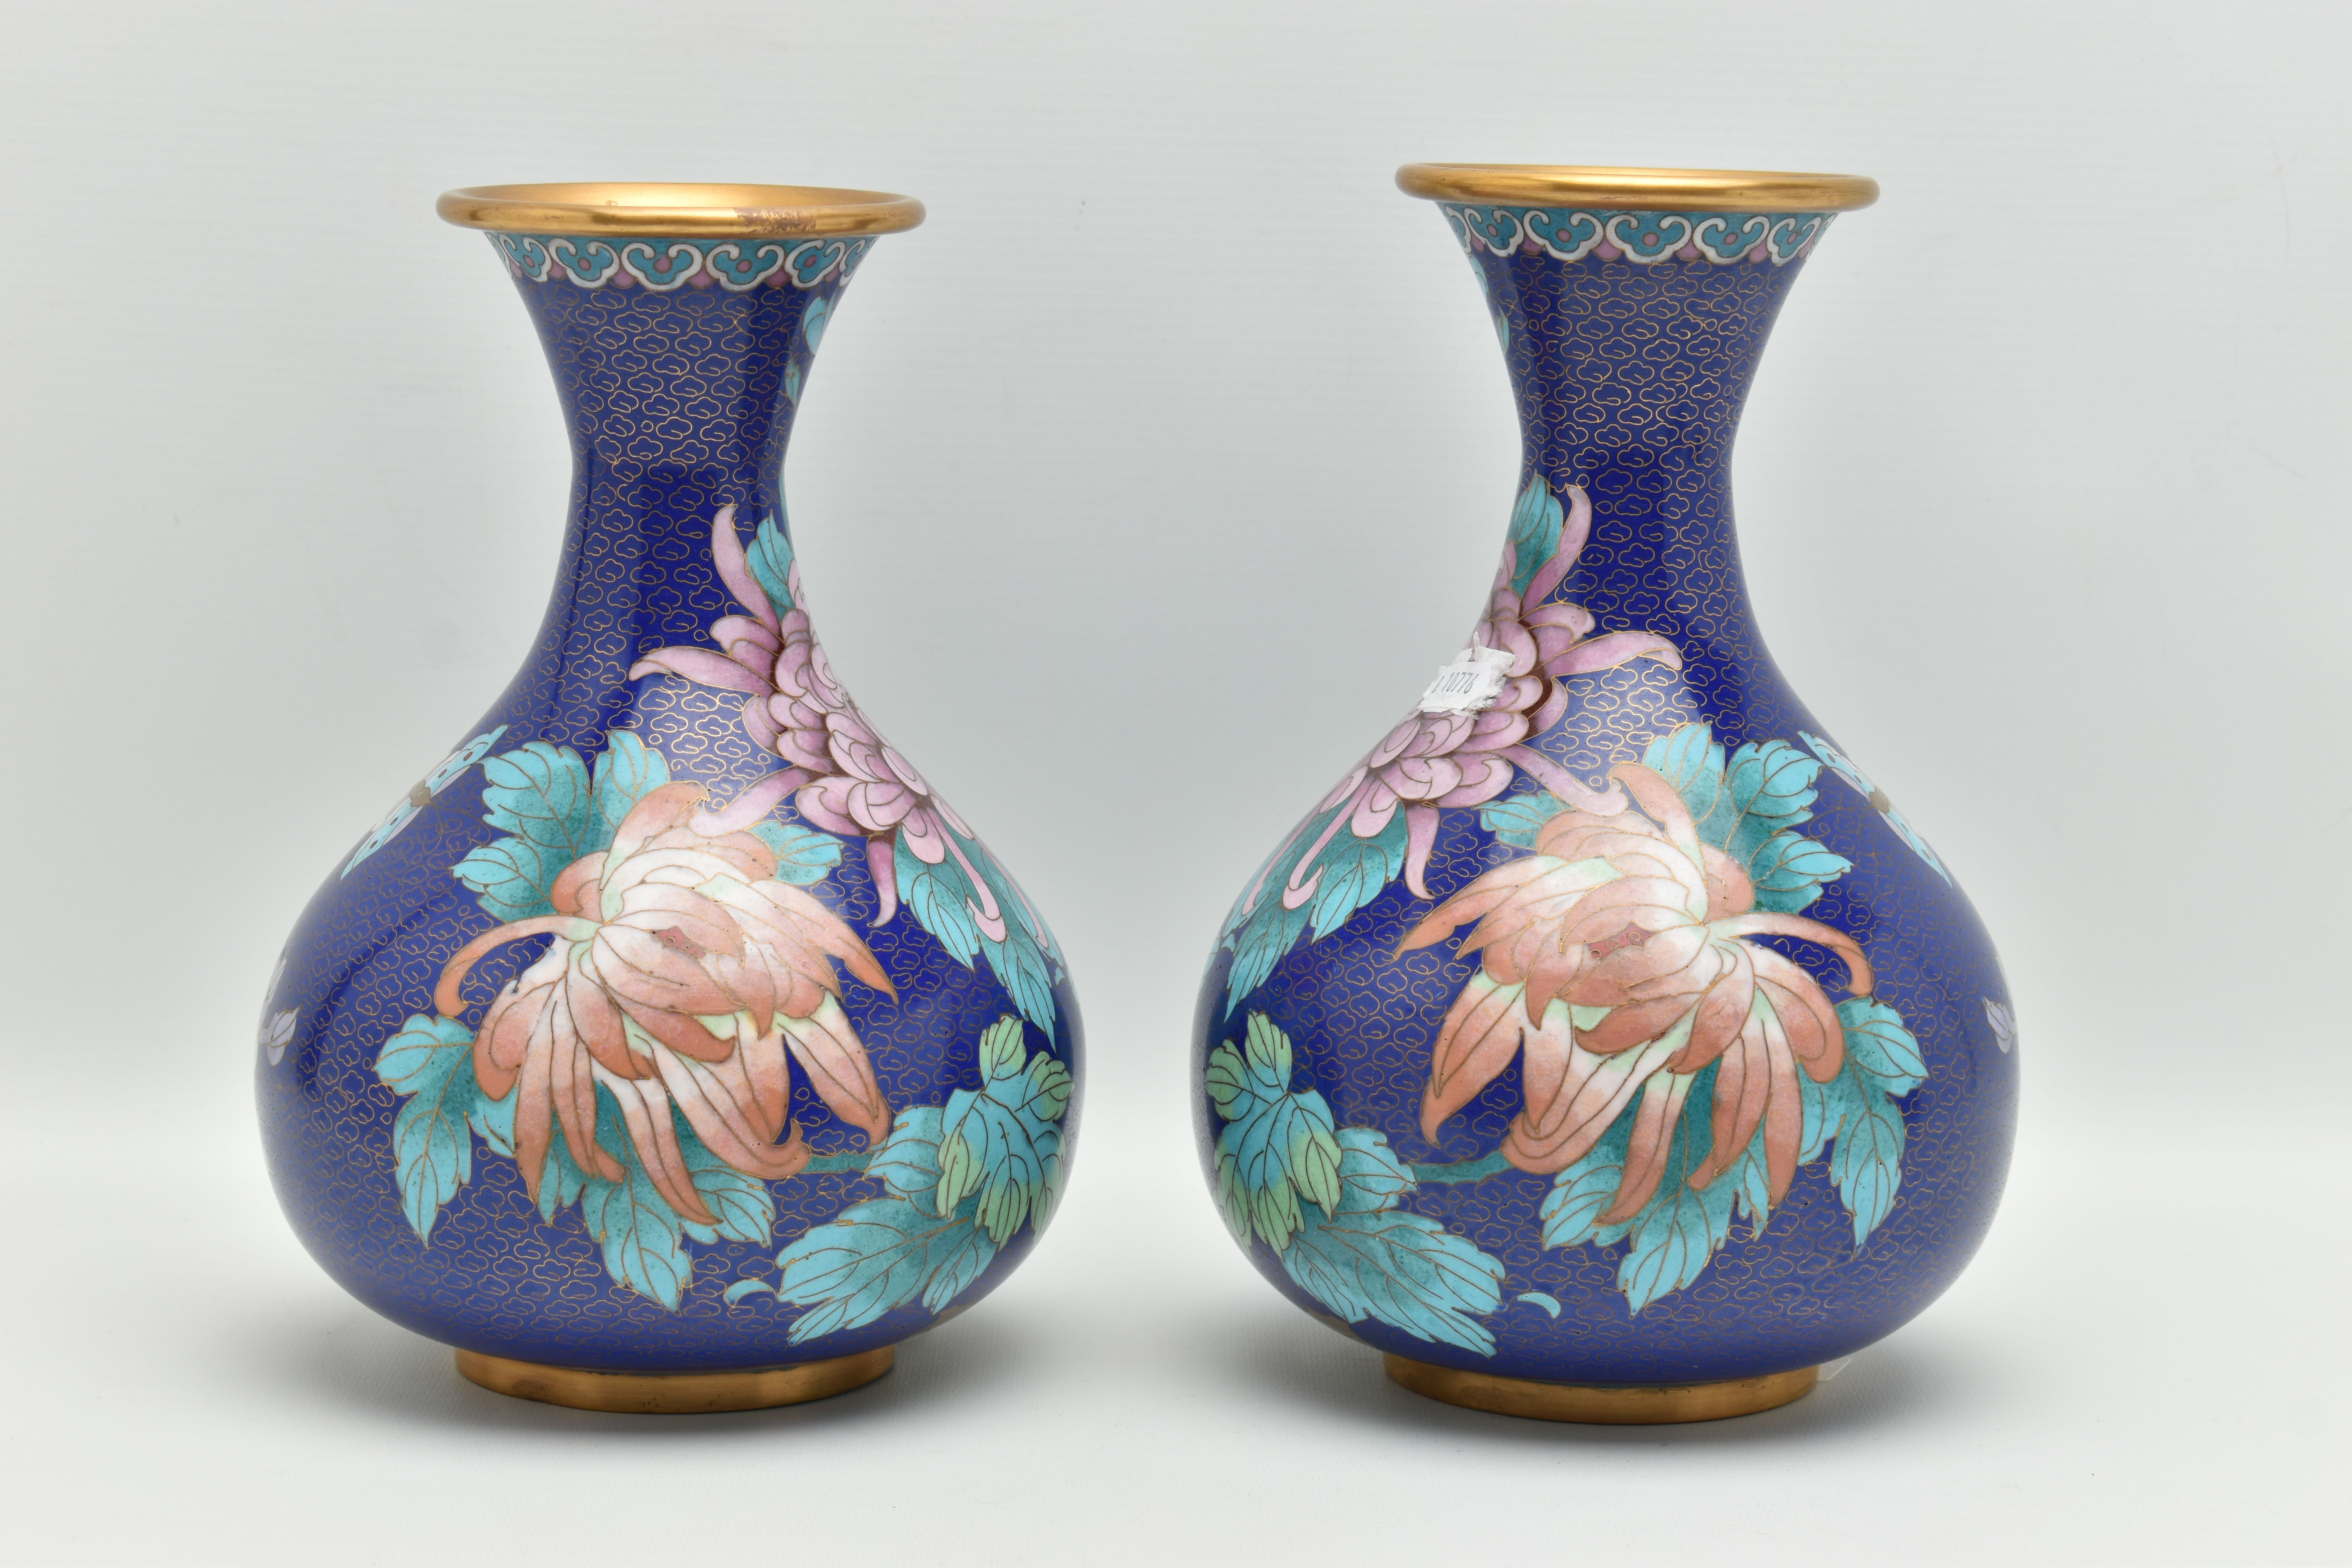 A PAIR OF MODERN CHINESE CLOISONNE VASES OF BALUSTER FORM, the blue ground with flowers, foliage and